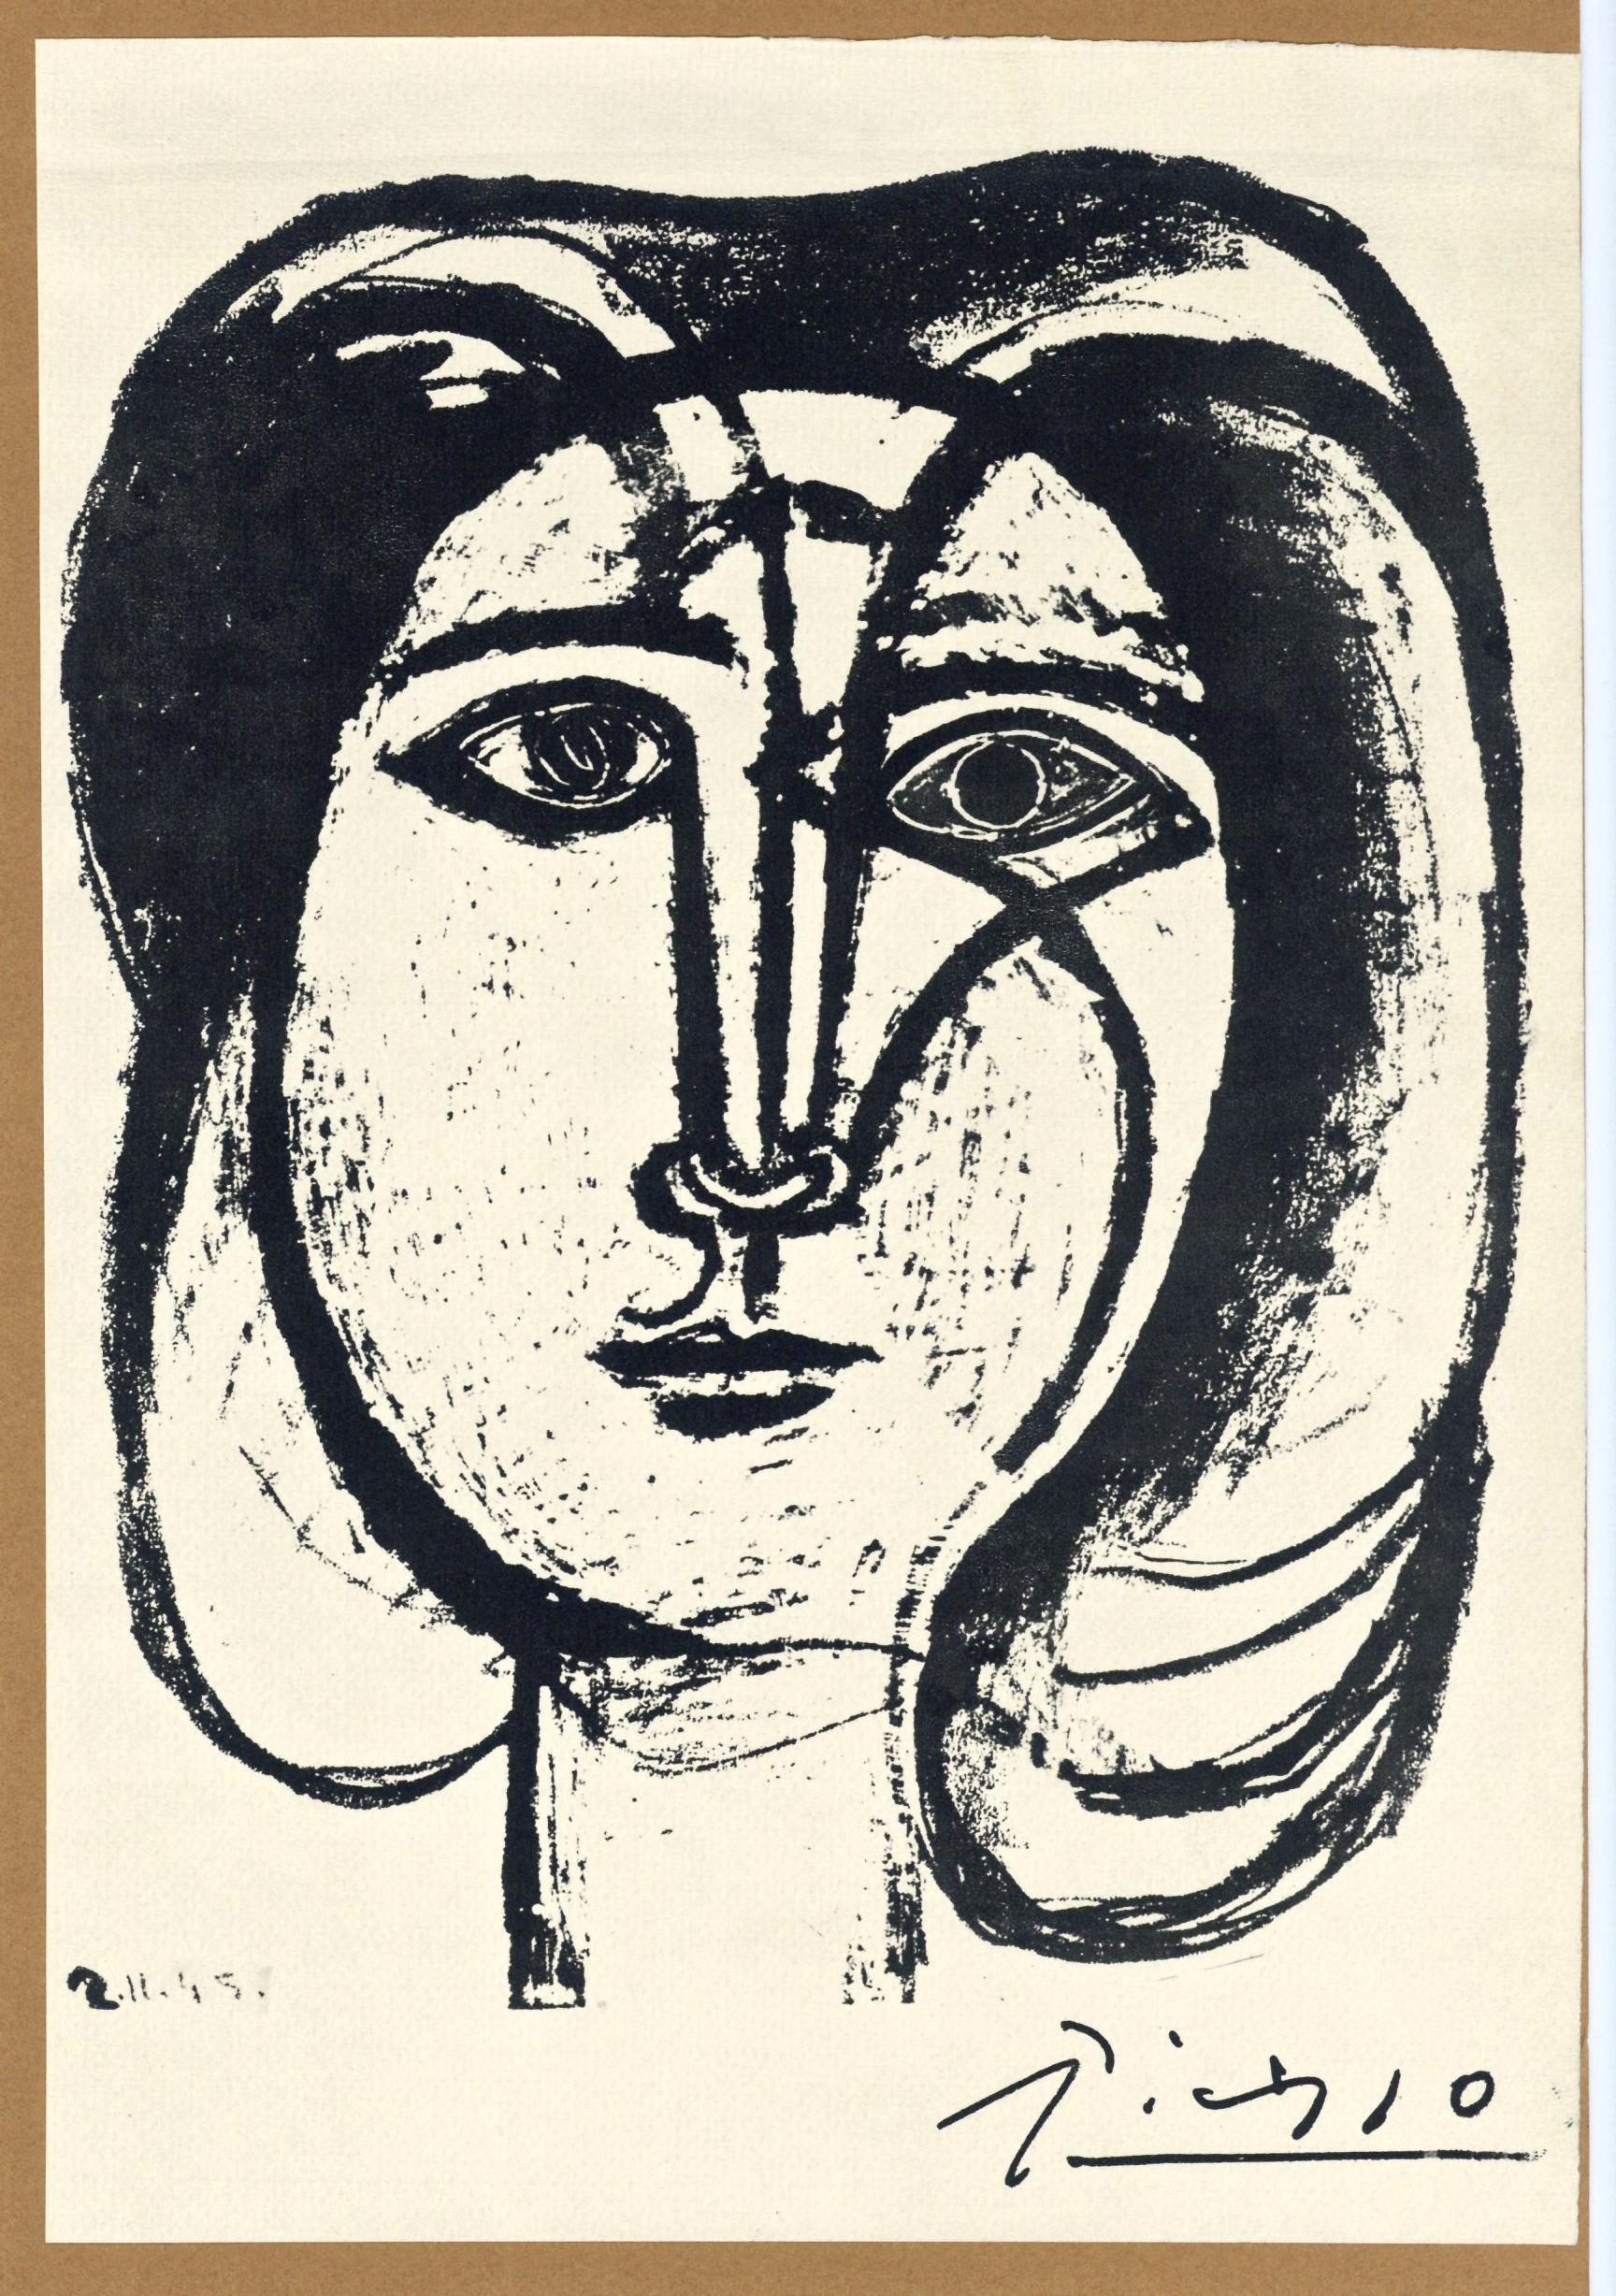 Traits, Tete de femme - lithograph poster and collage - Print by (after) Pablo Picasso